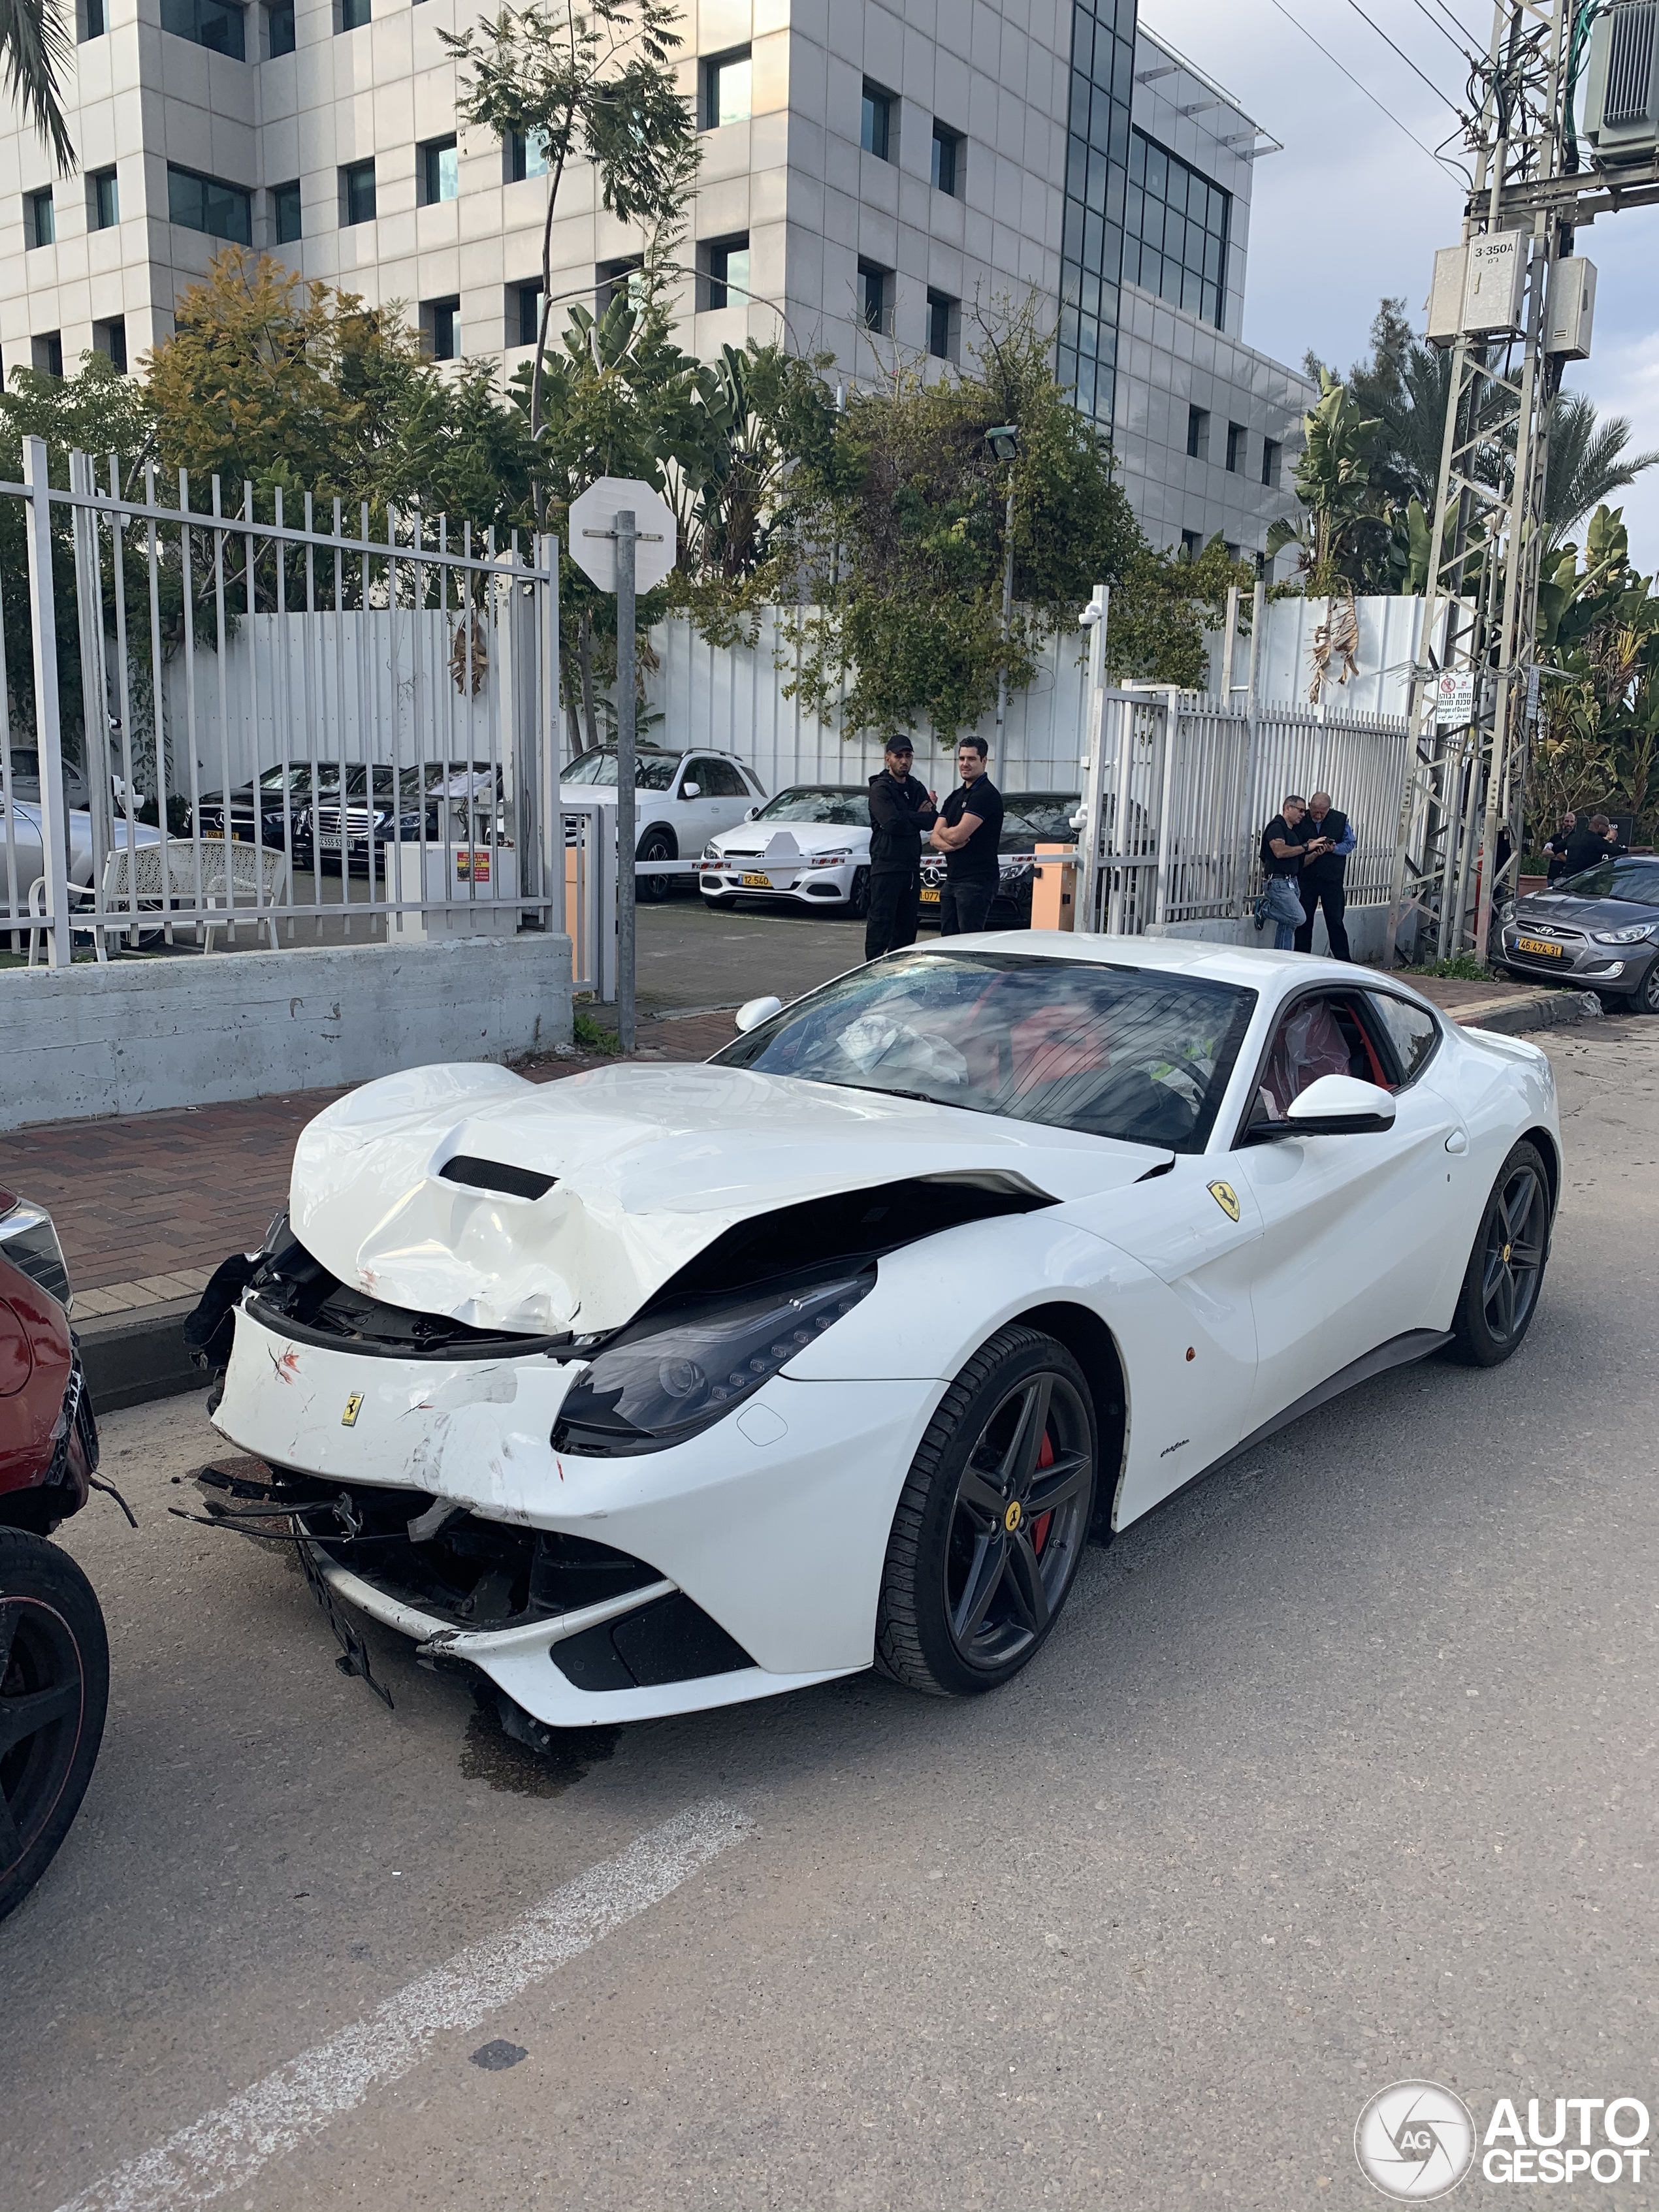 This F12 has seen better days.